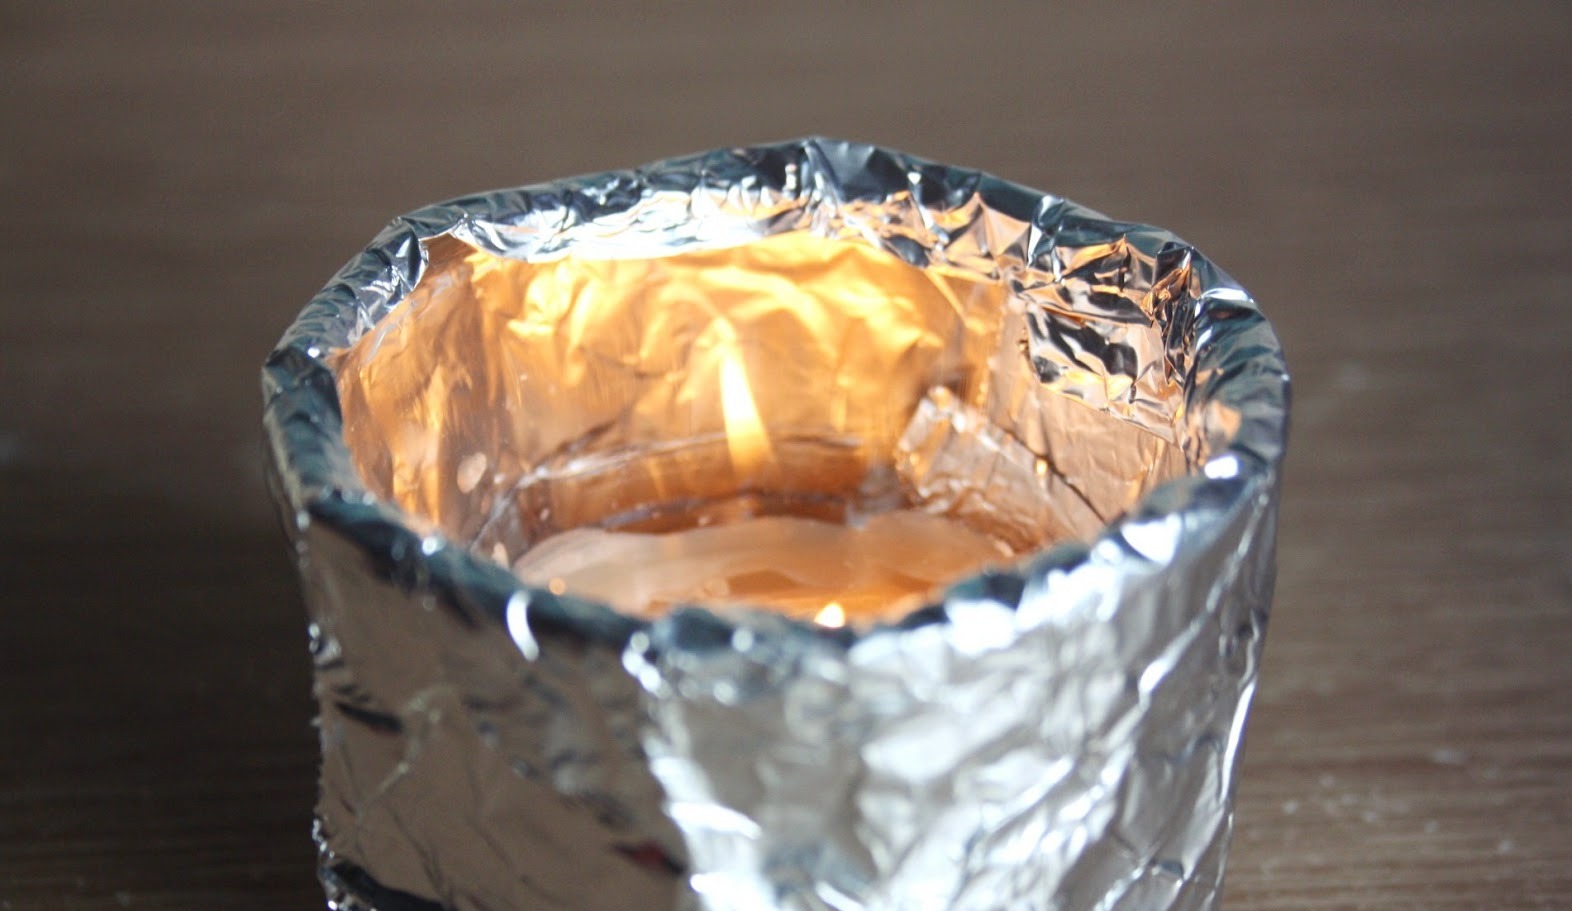 aluminum foil wrapped around a candle's vessel